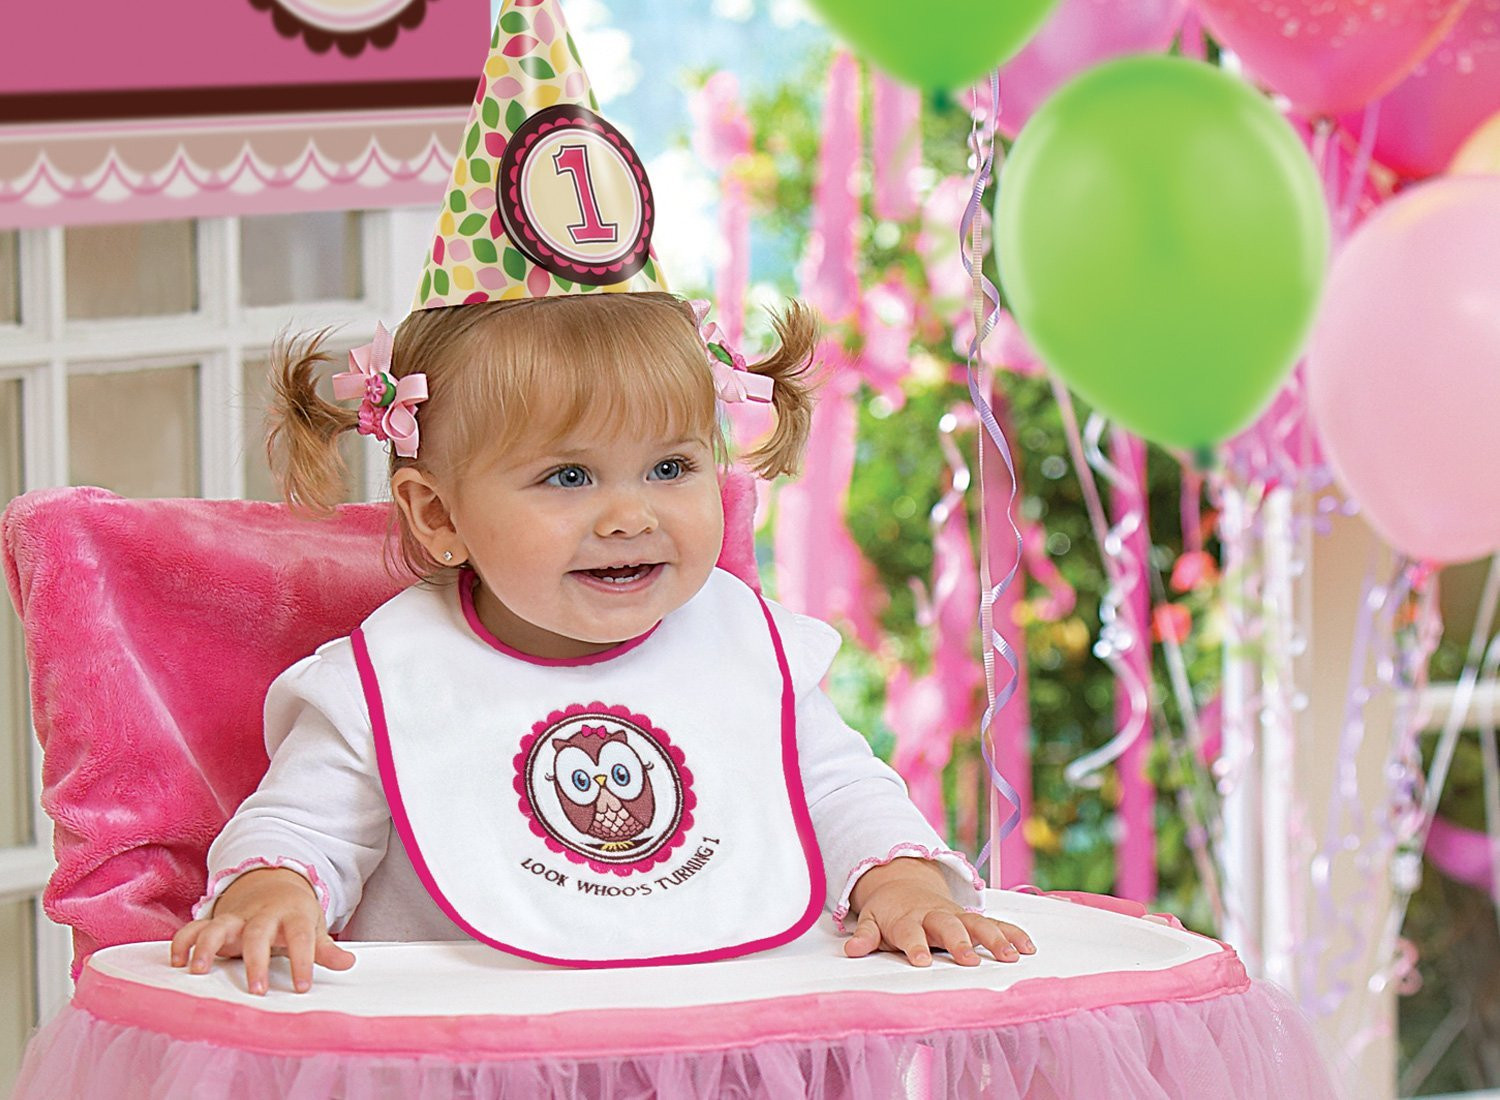 Baby Girls Birthday Party Ideas
 22 Fun Ideas For Your Baby Girl s First Birthday Shoot